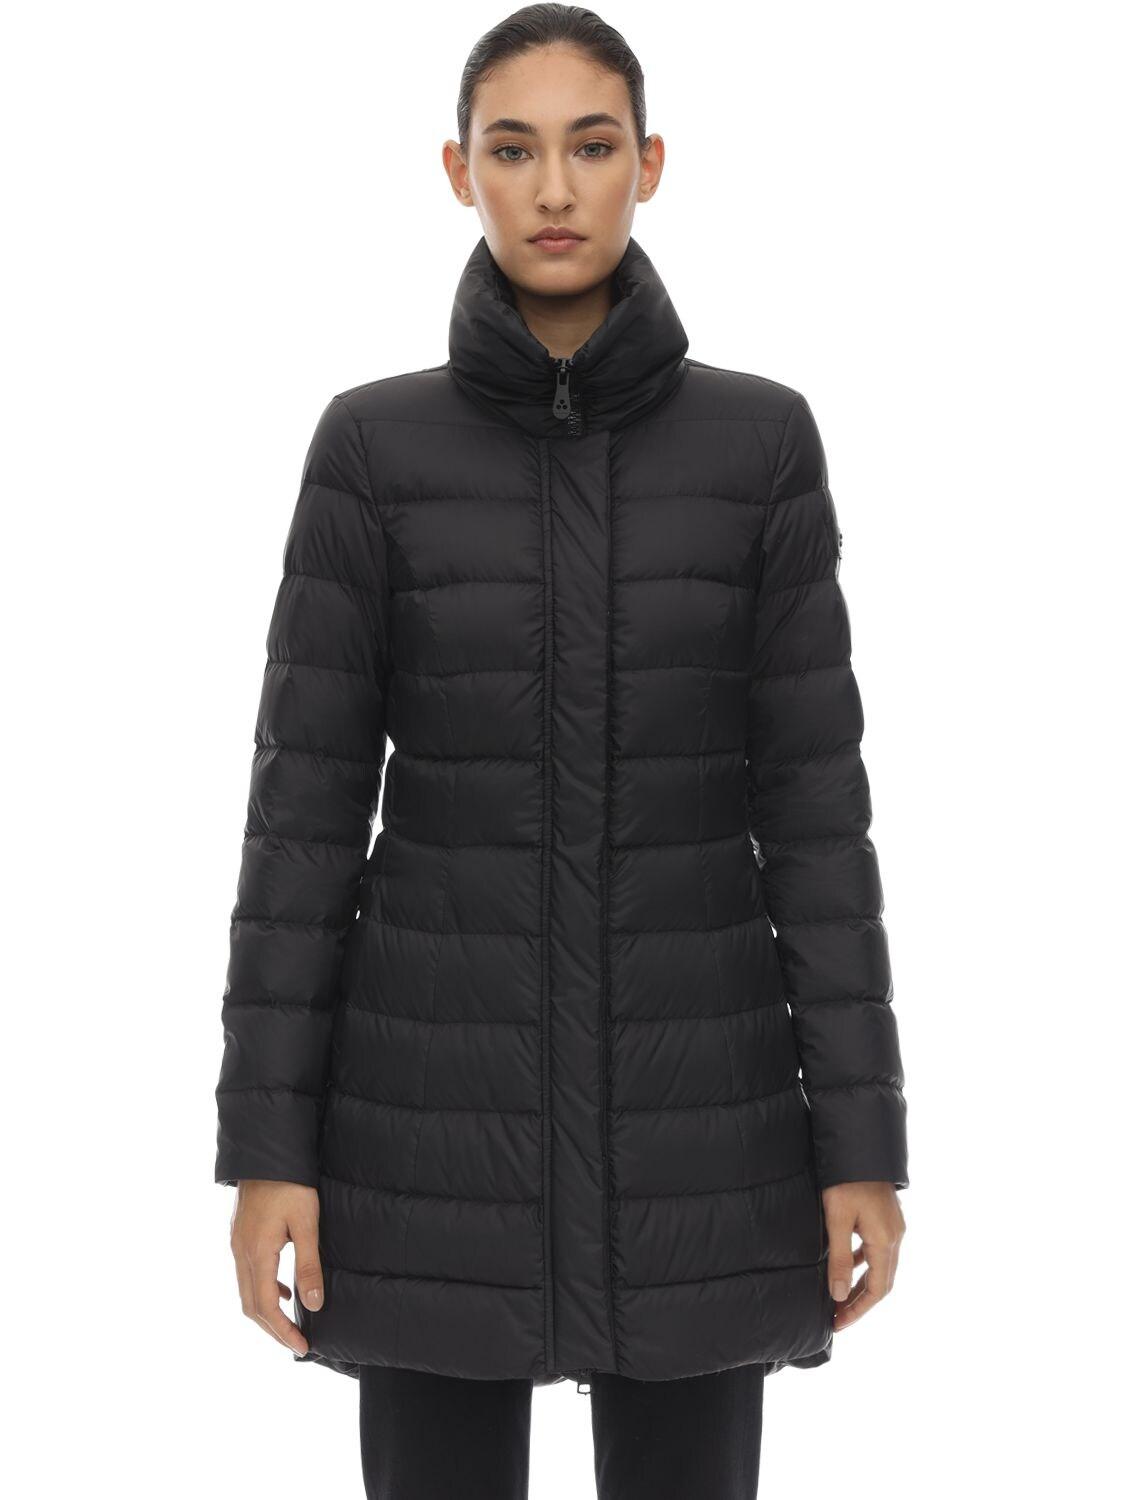 Peuterey Synthetic Nylon Down Jacket in Black - Lyst